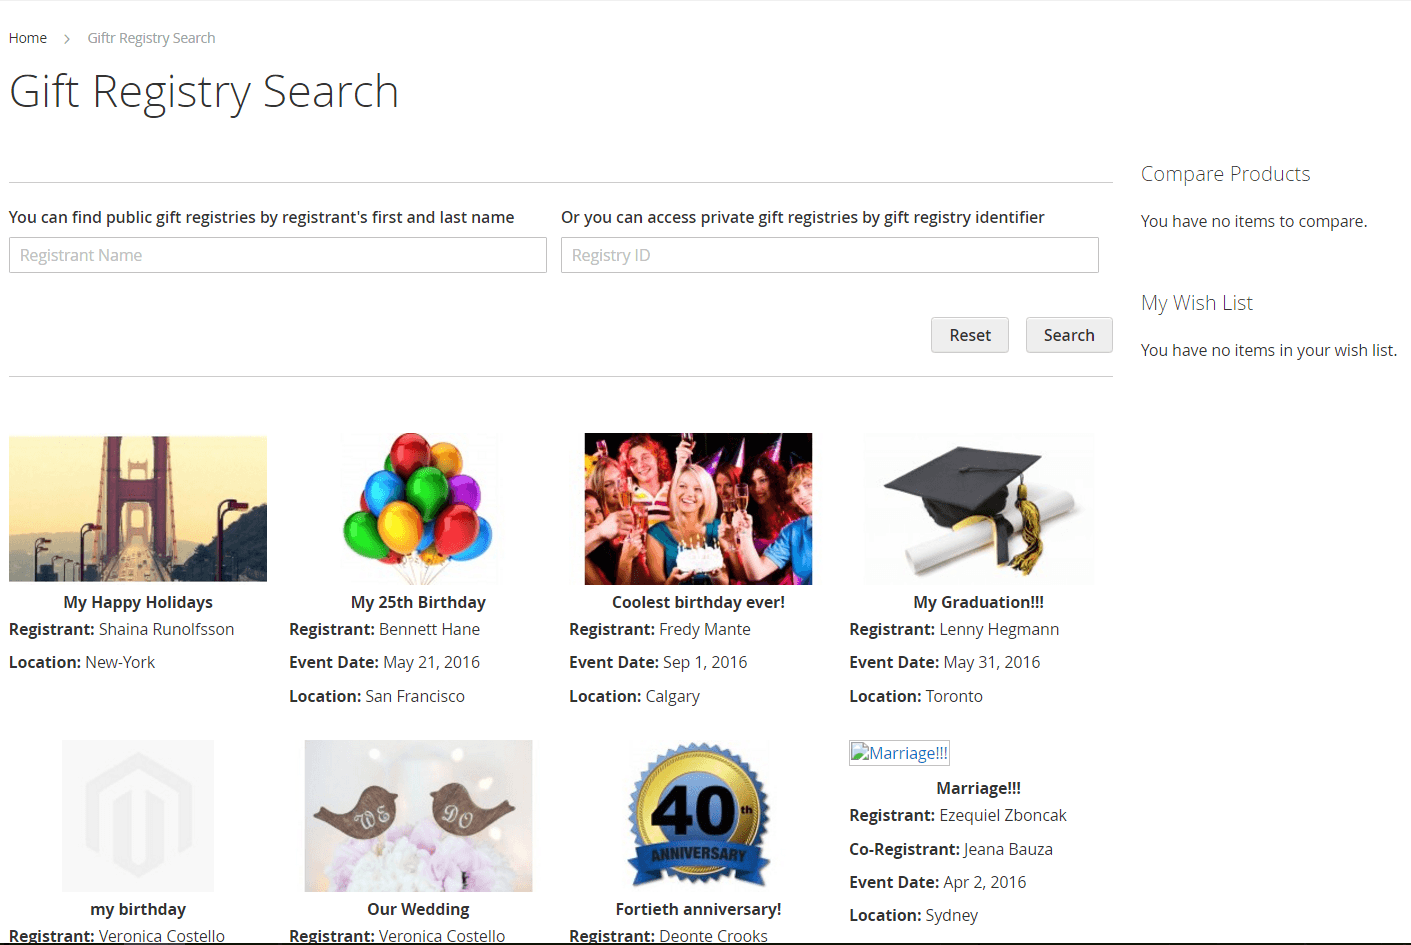 Convenient Gift Registry Search